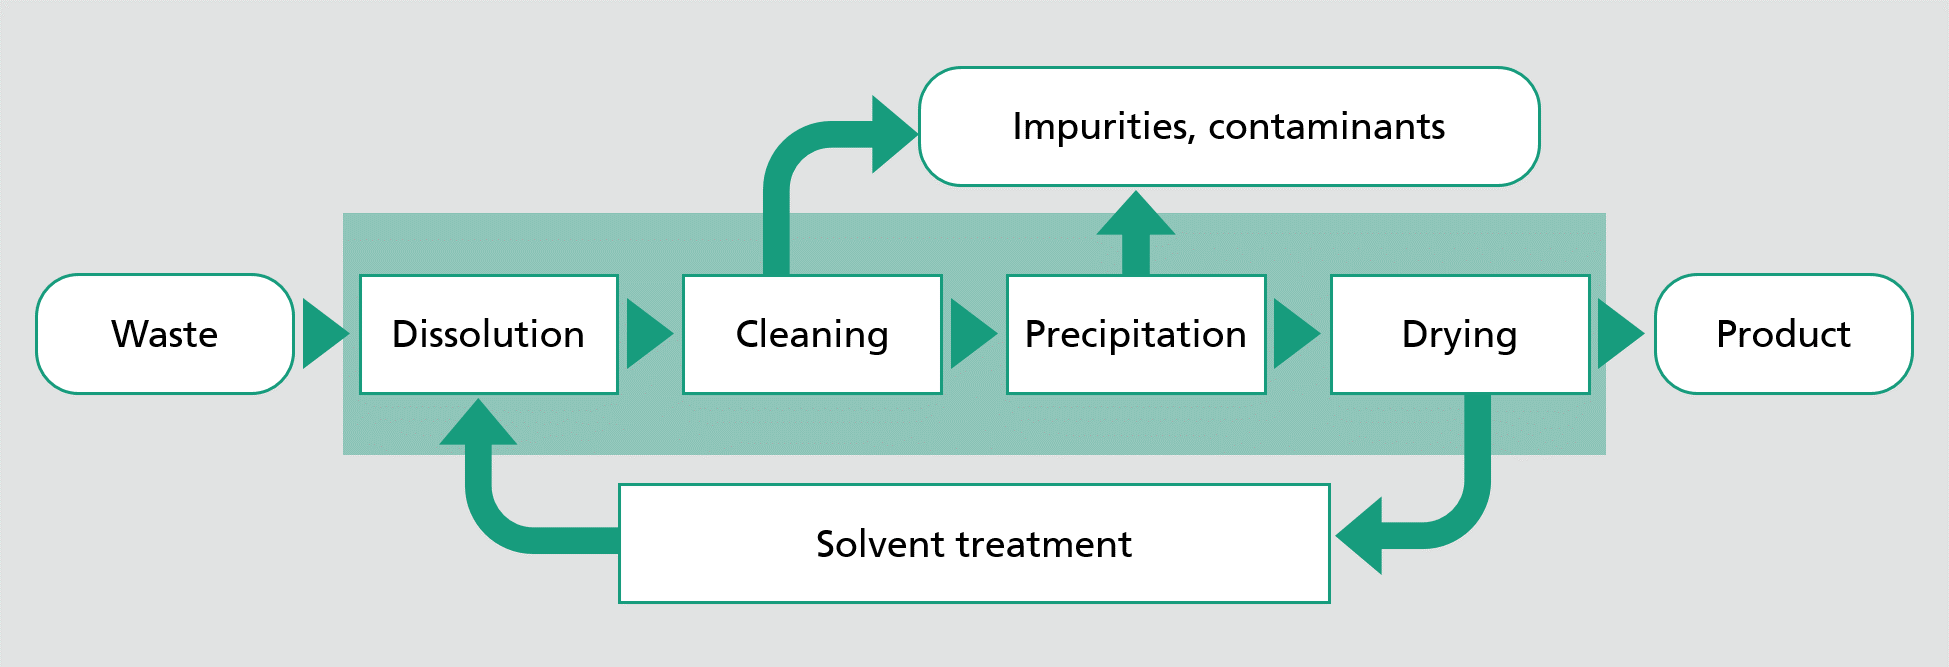 Process diagram of solvent-based recycling